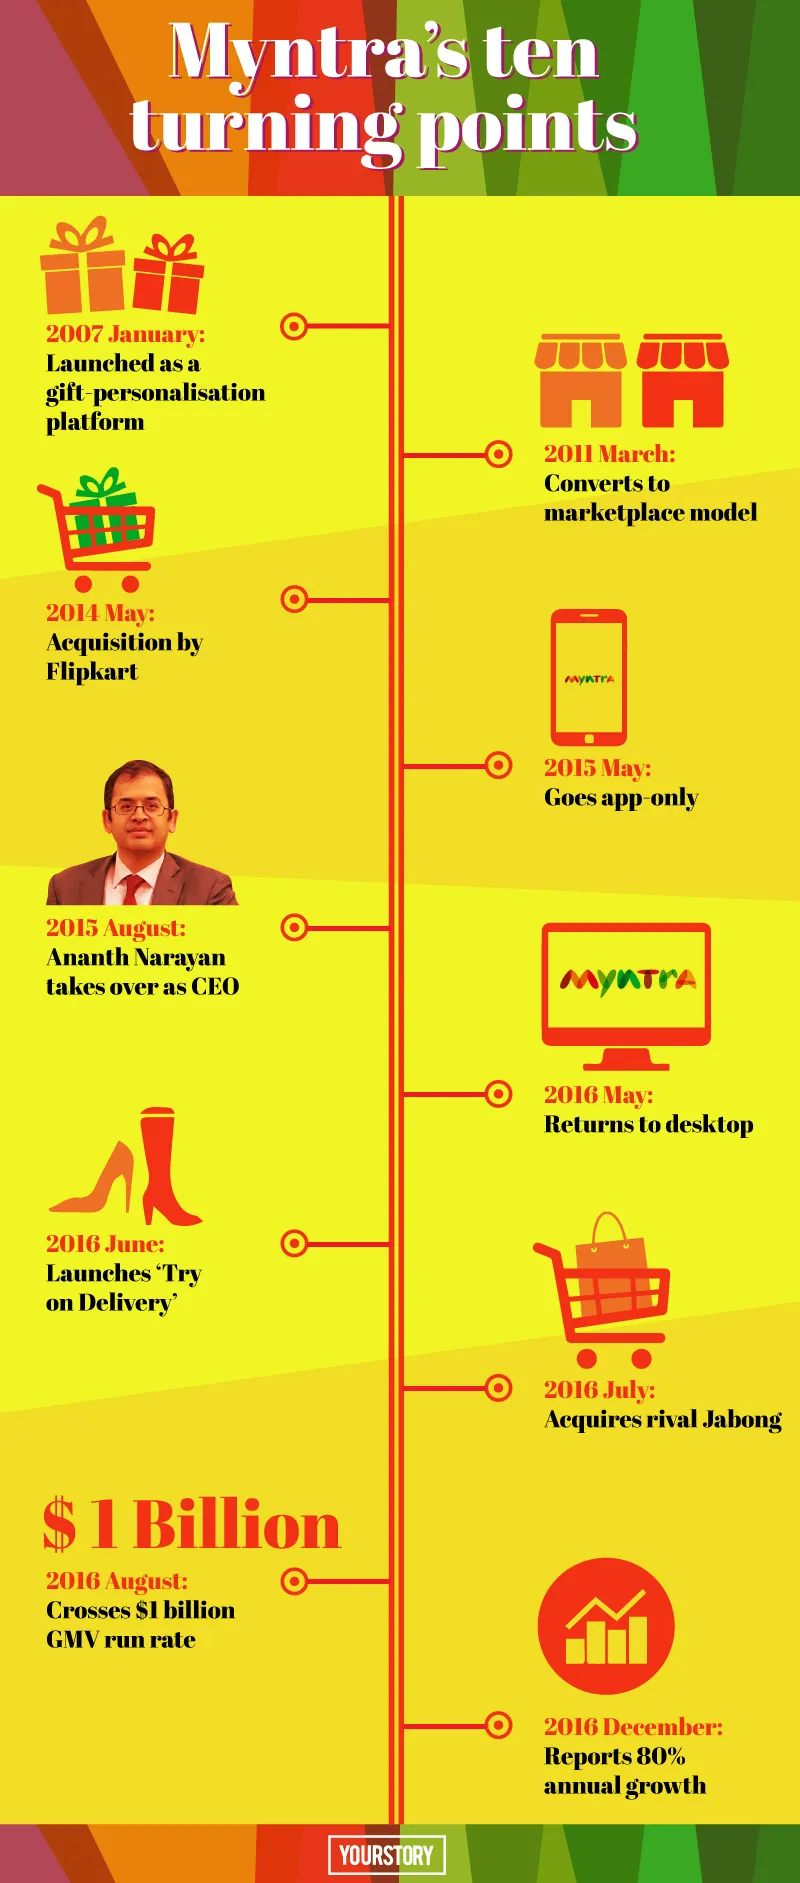 Myntra - Are you ready for the end game? Open your Myntra